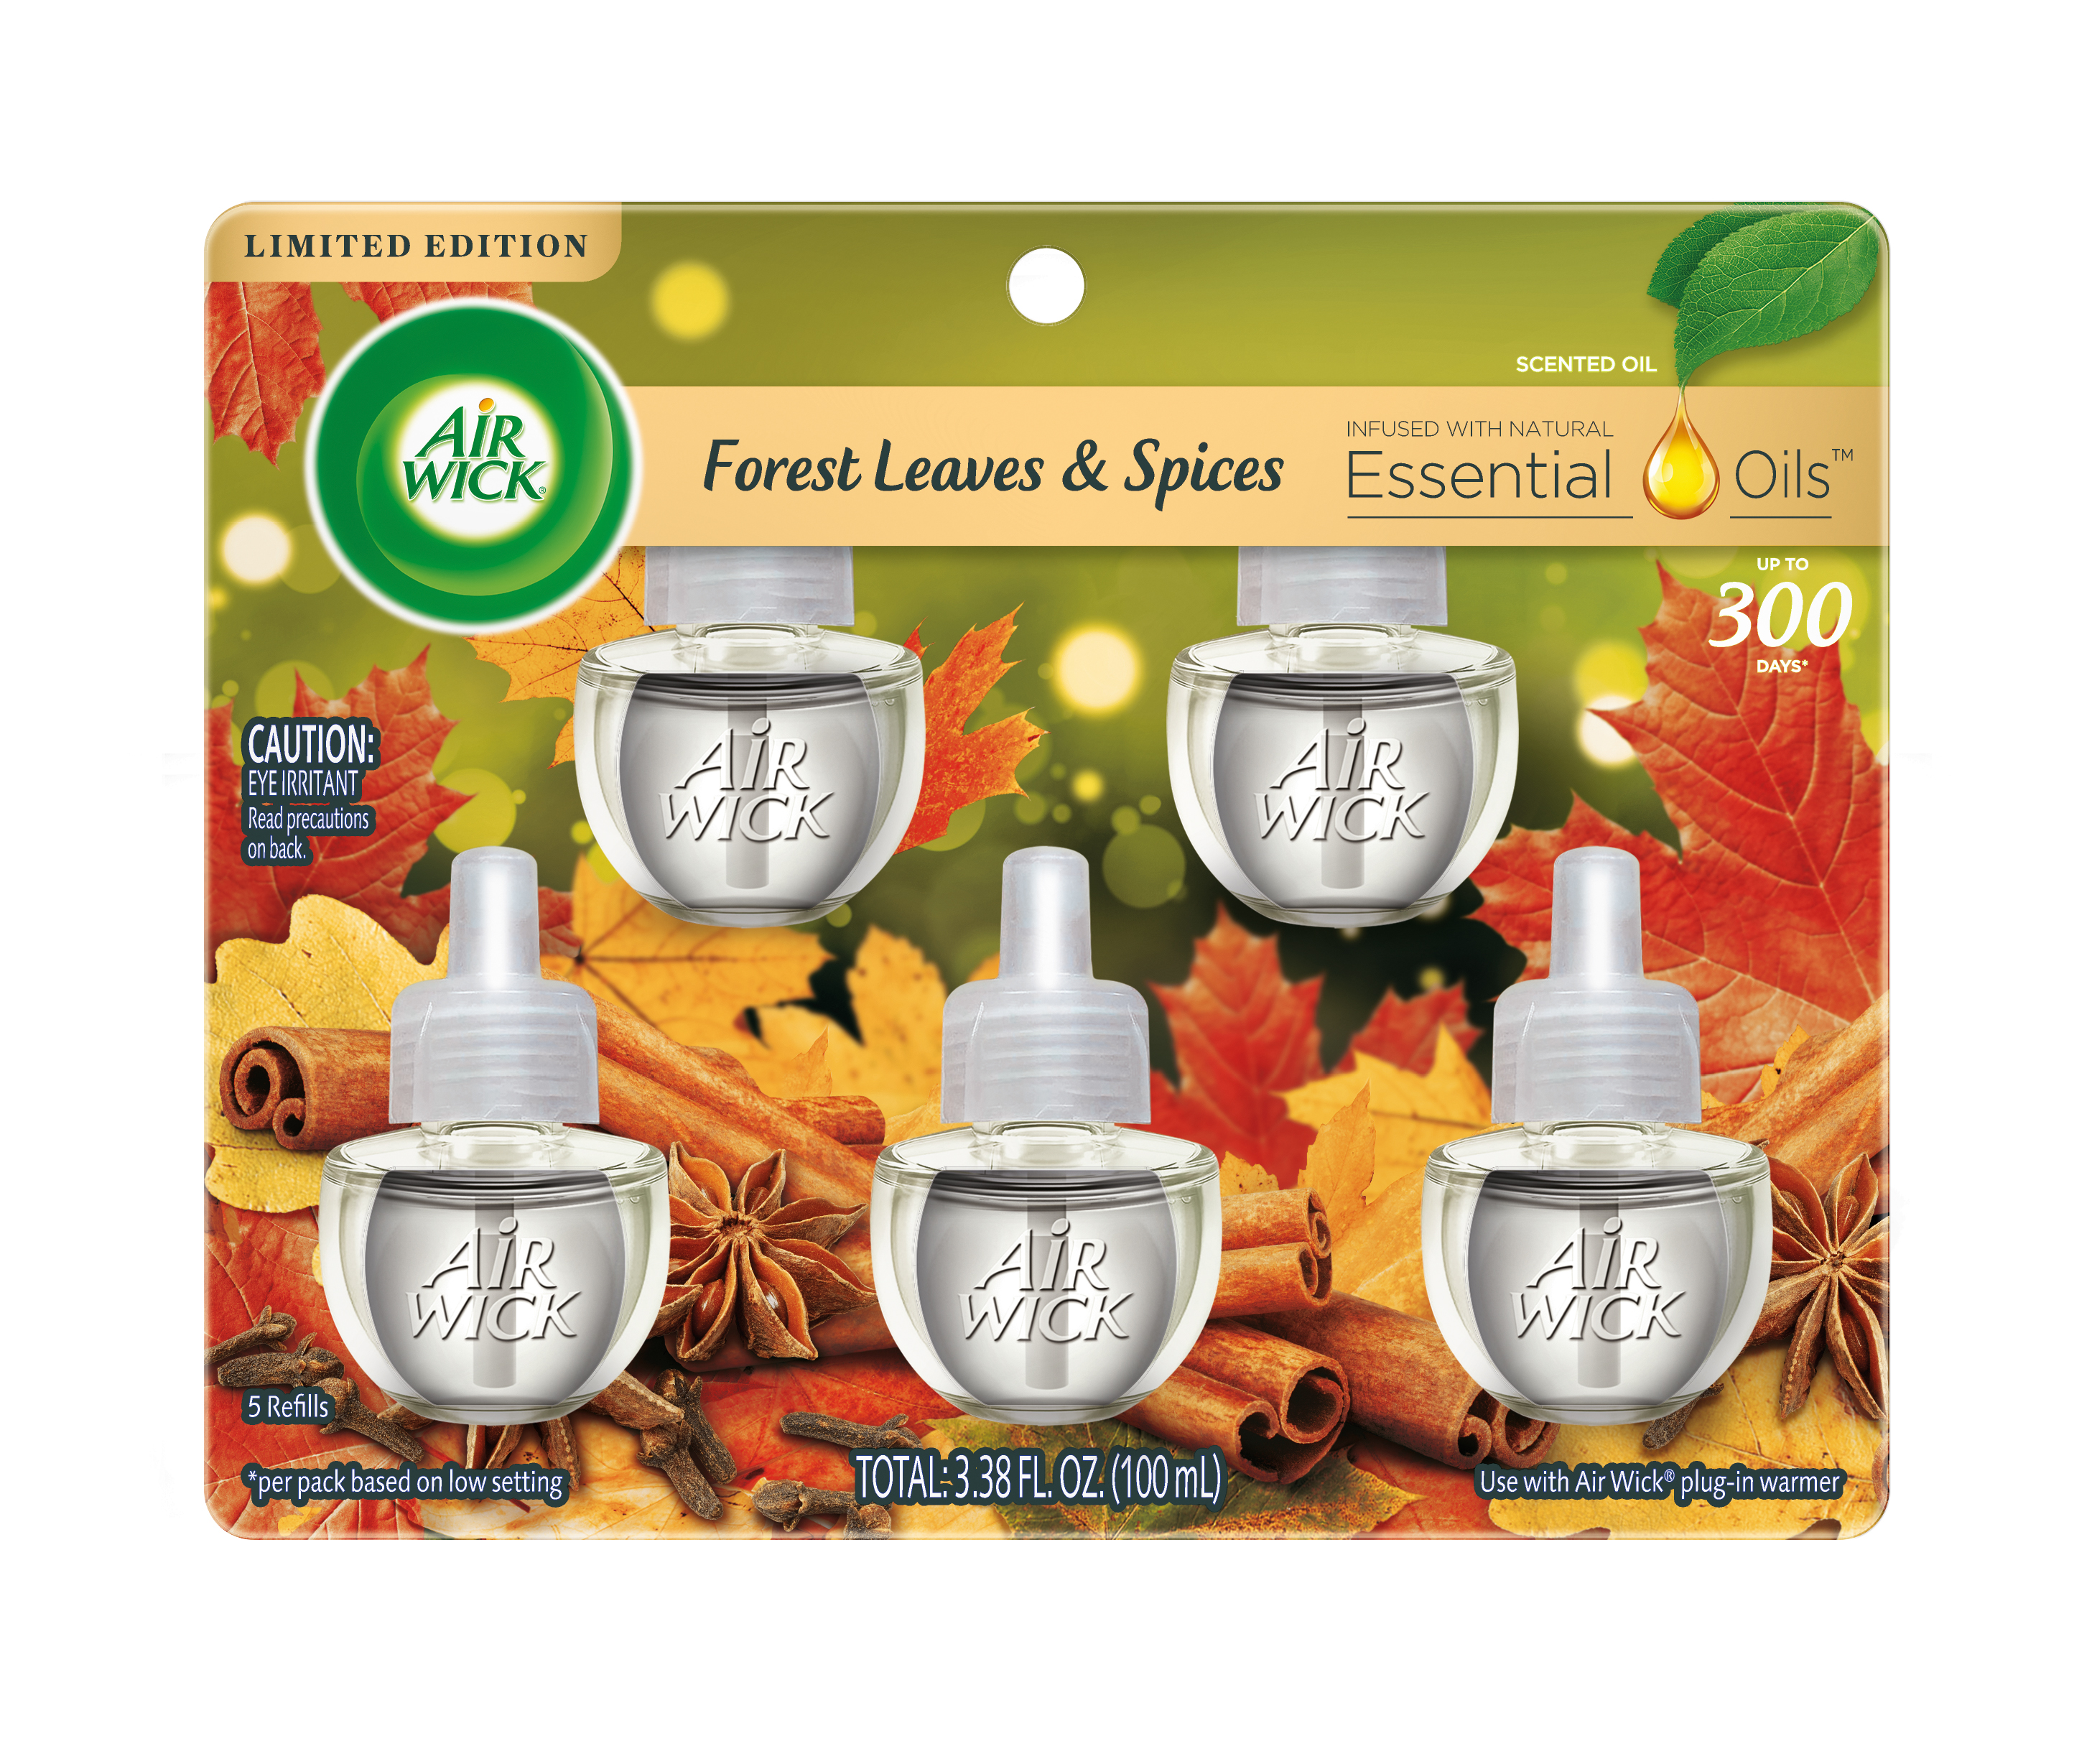 AIR WICK® Scented Oil - Forest Leaves & Spices